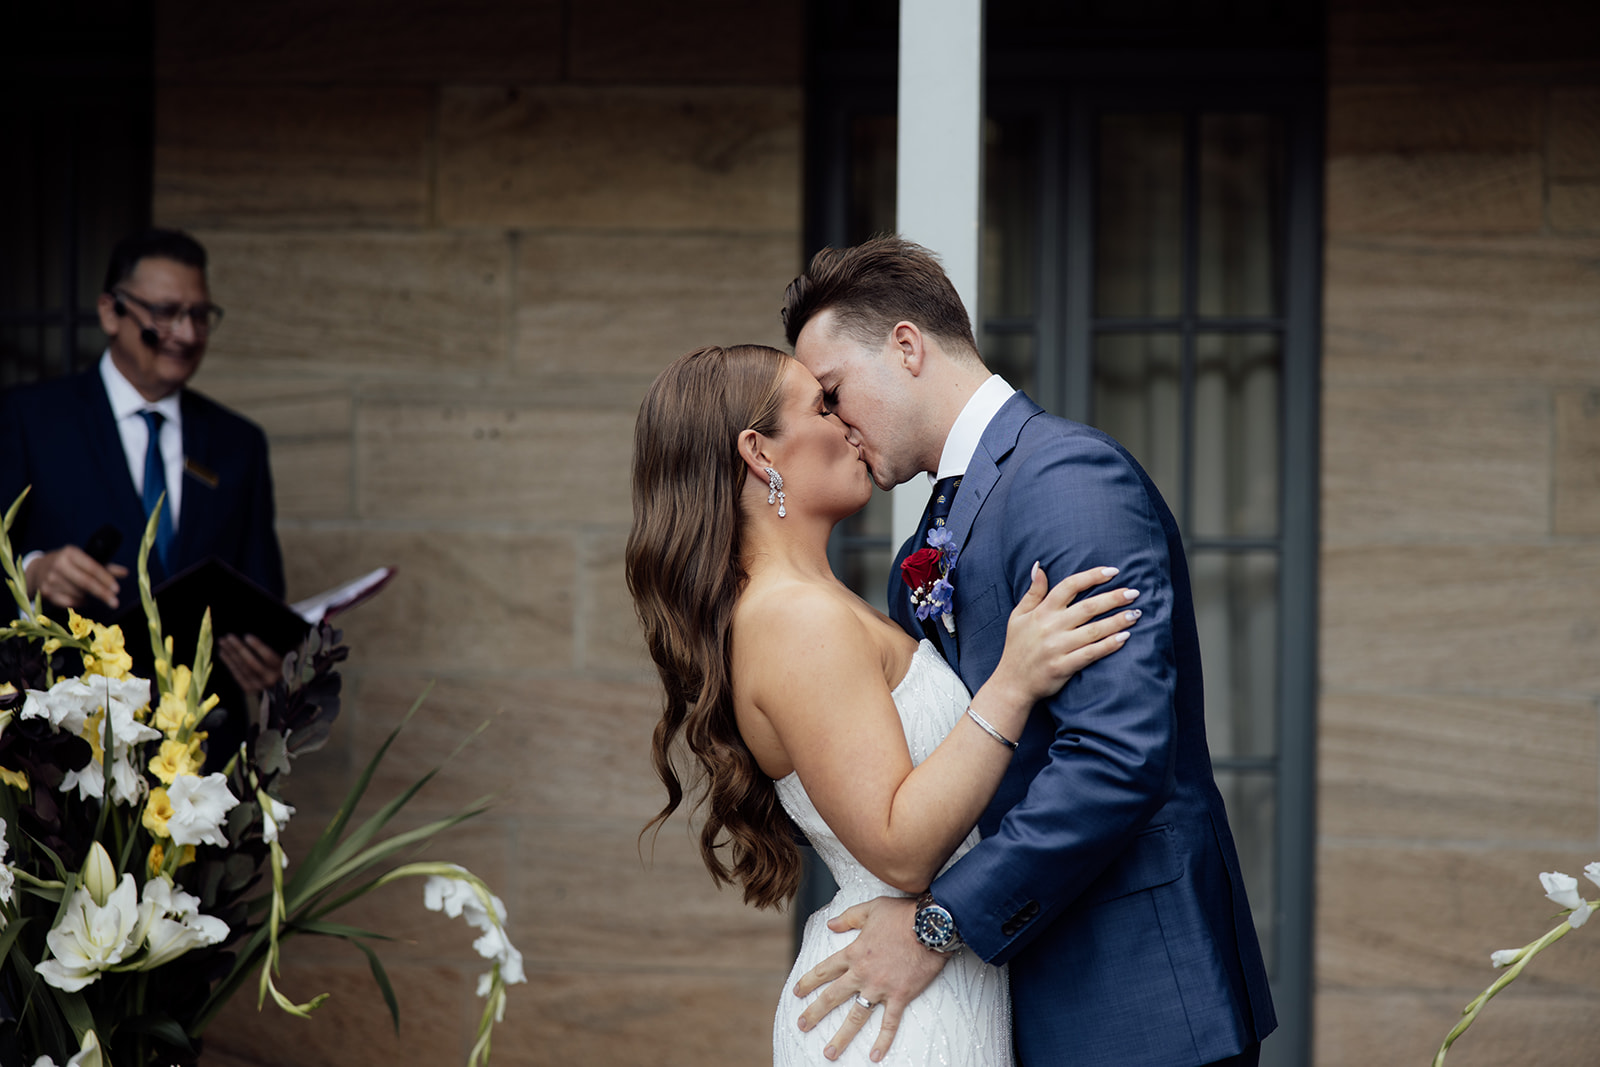 A bride and groom first kiss